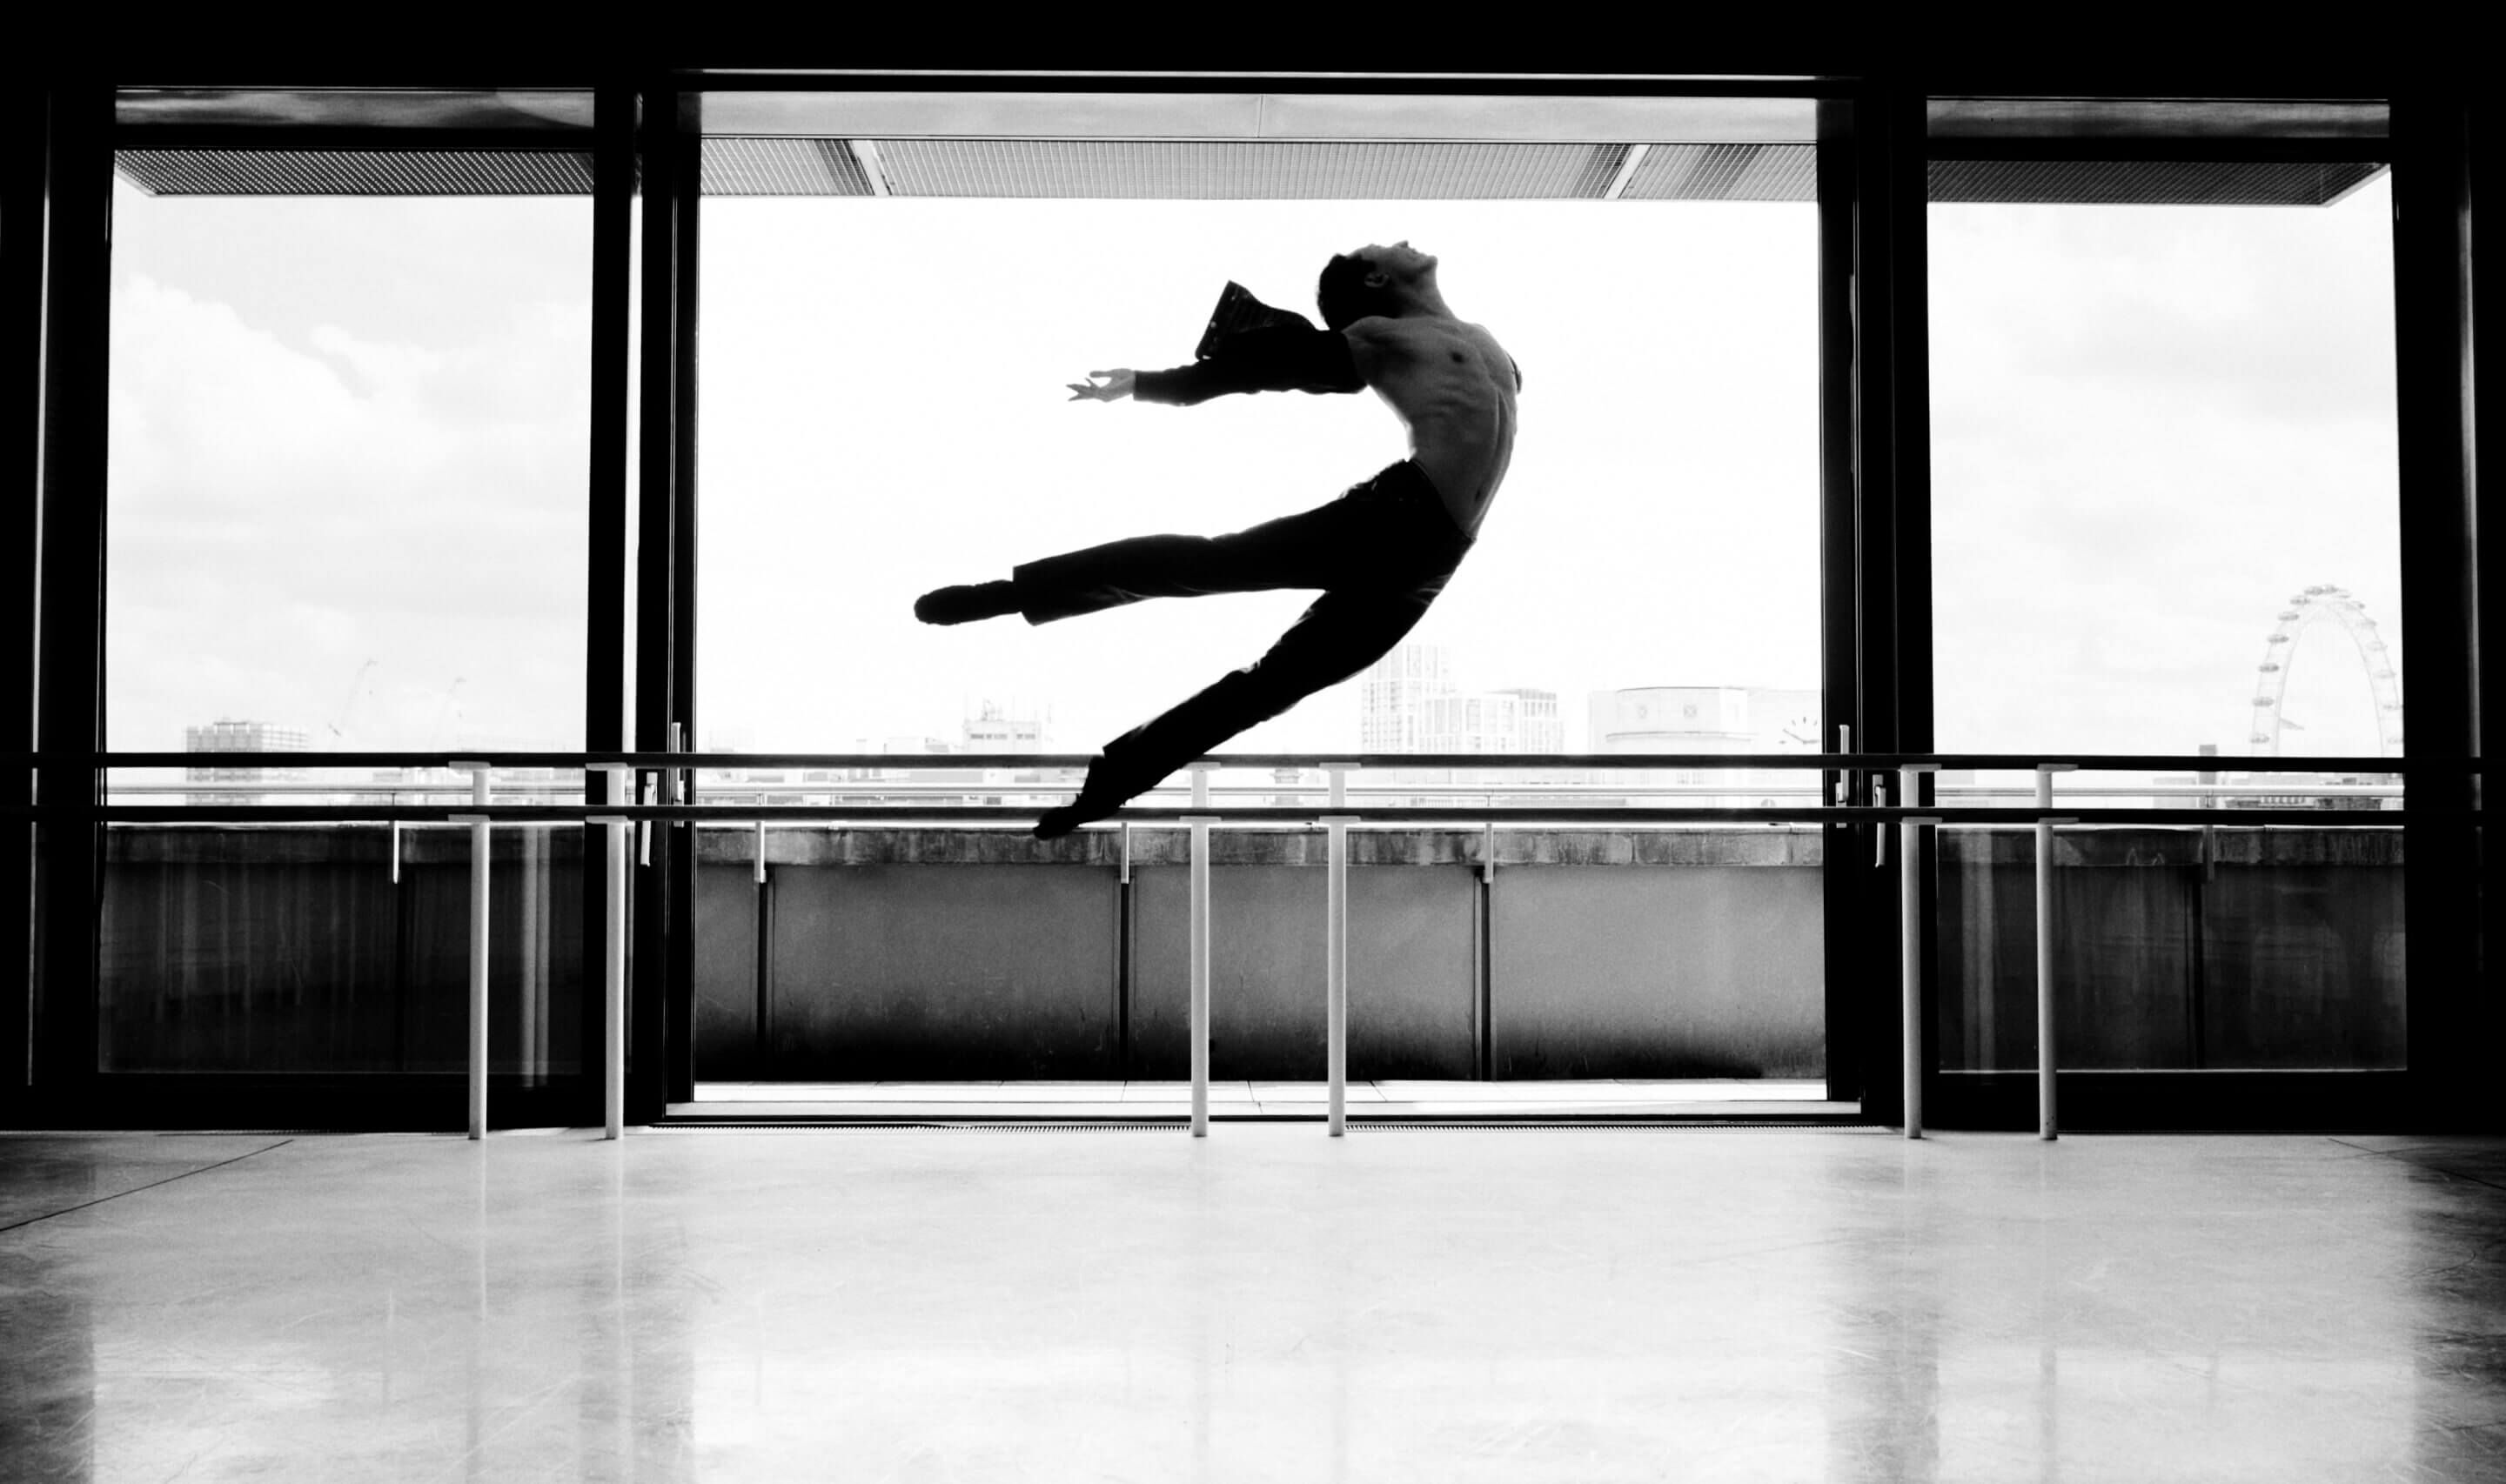 A black and white photograph showing a man dancing ballet and jumping in the air.